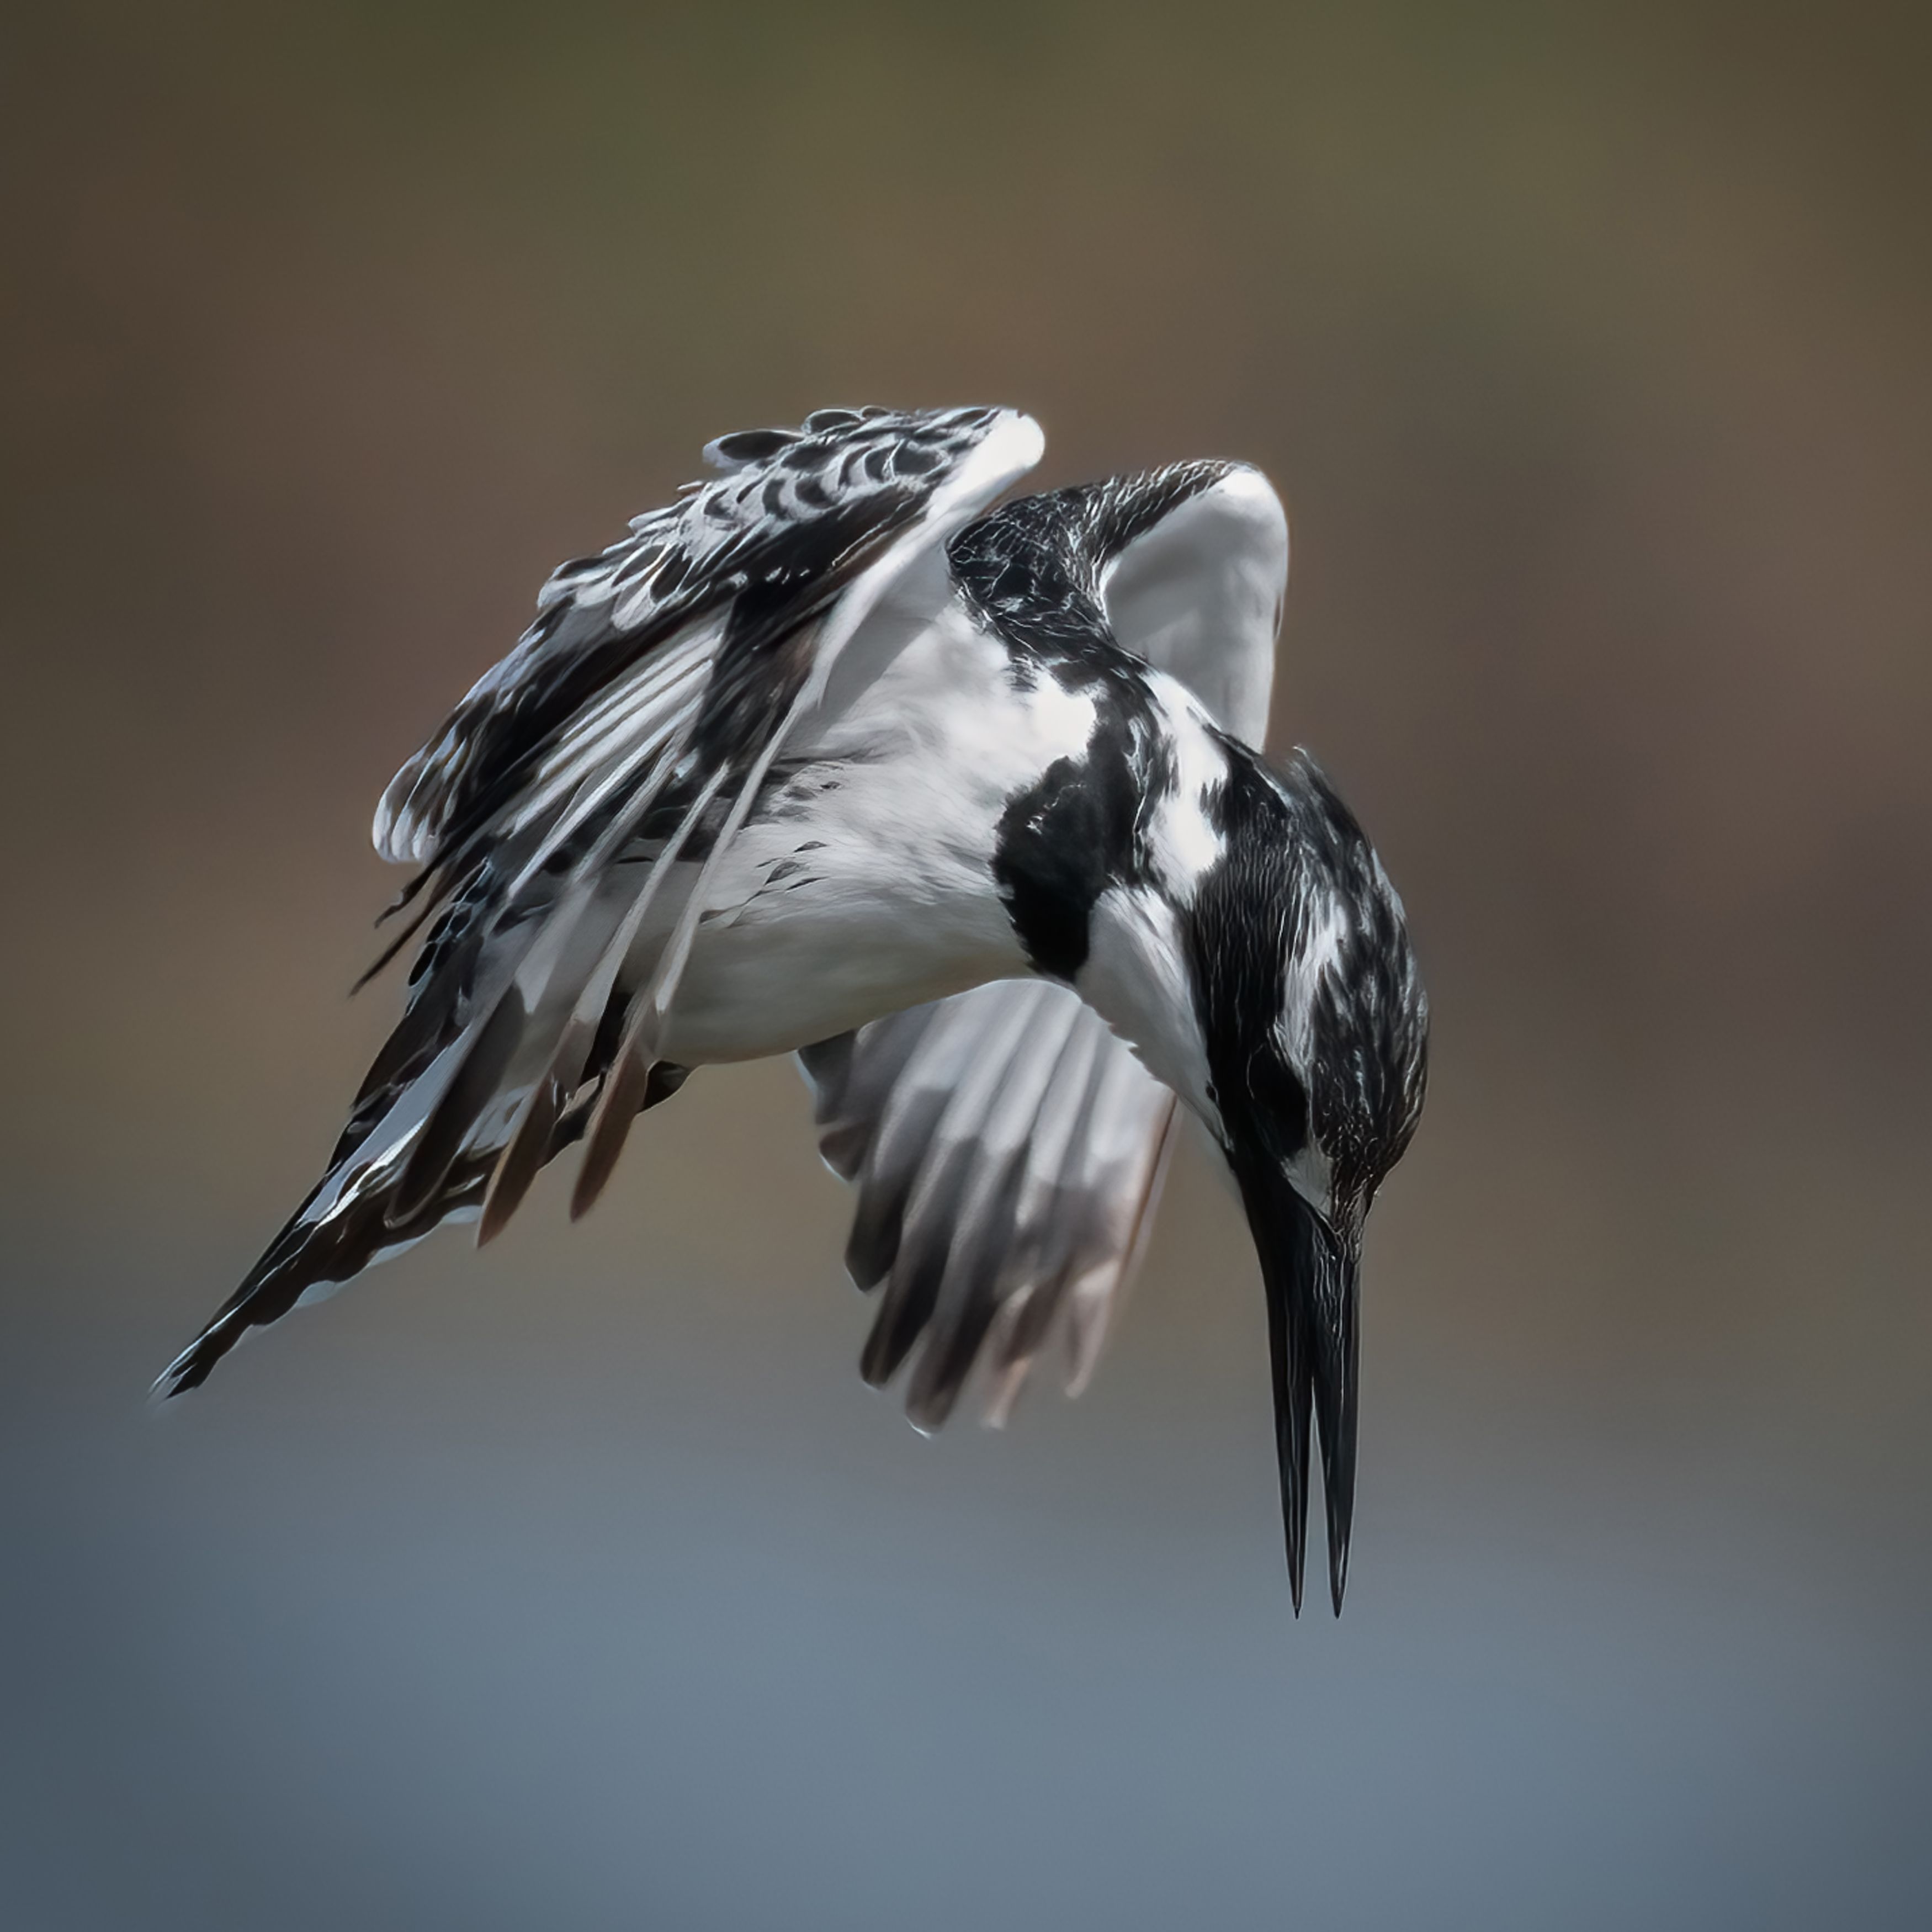 pied kingfisher, kingfisher, fly, in flight, flying, bird, birds, wing, wings, feather, feathers, Ahmed Zaeitar